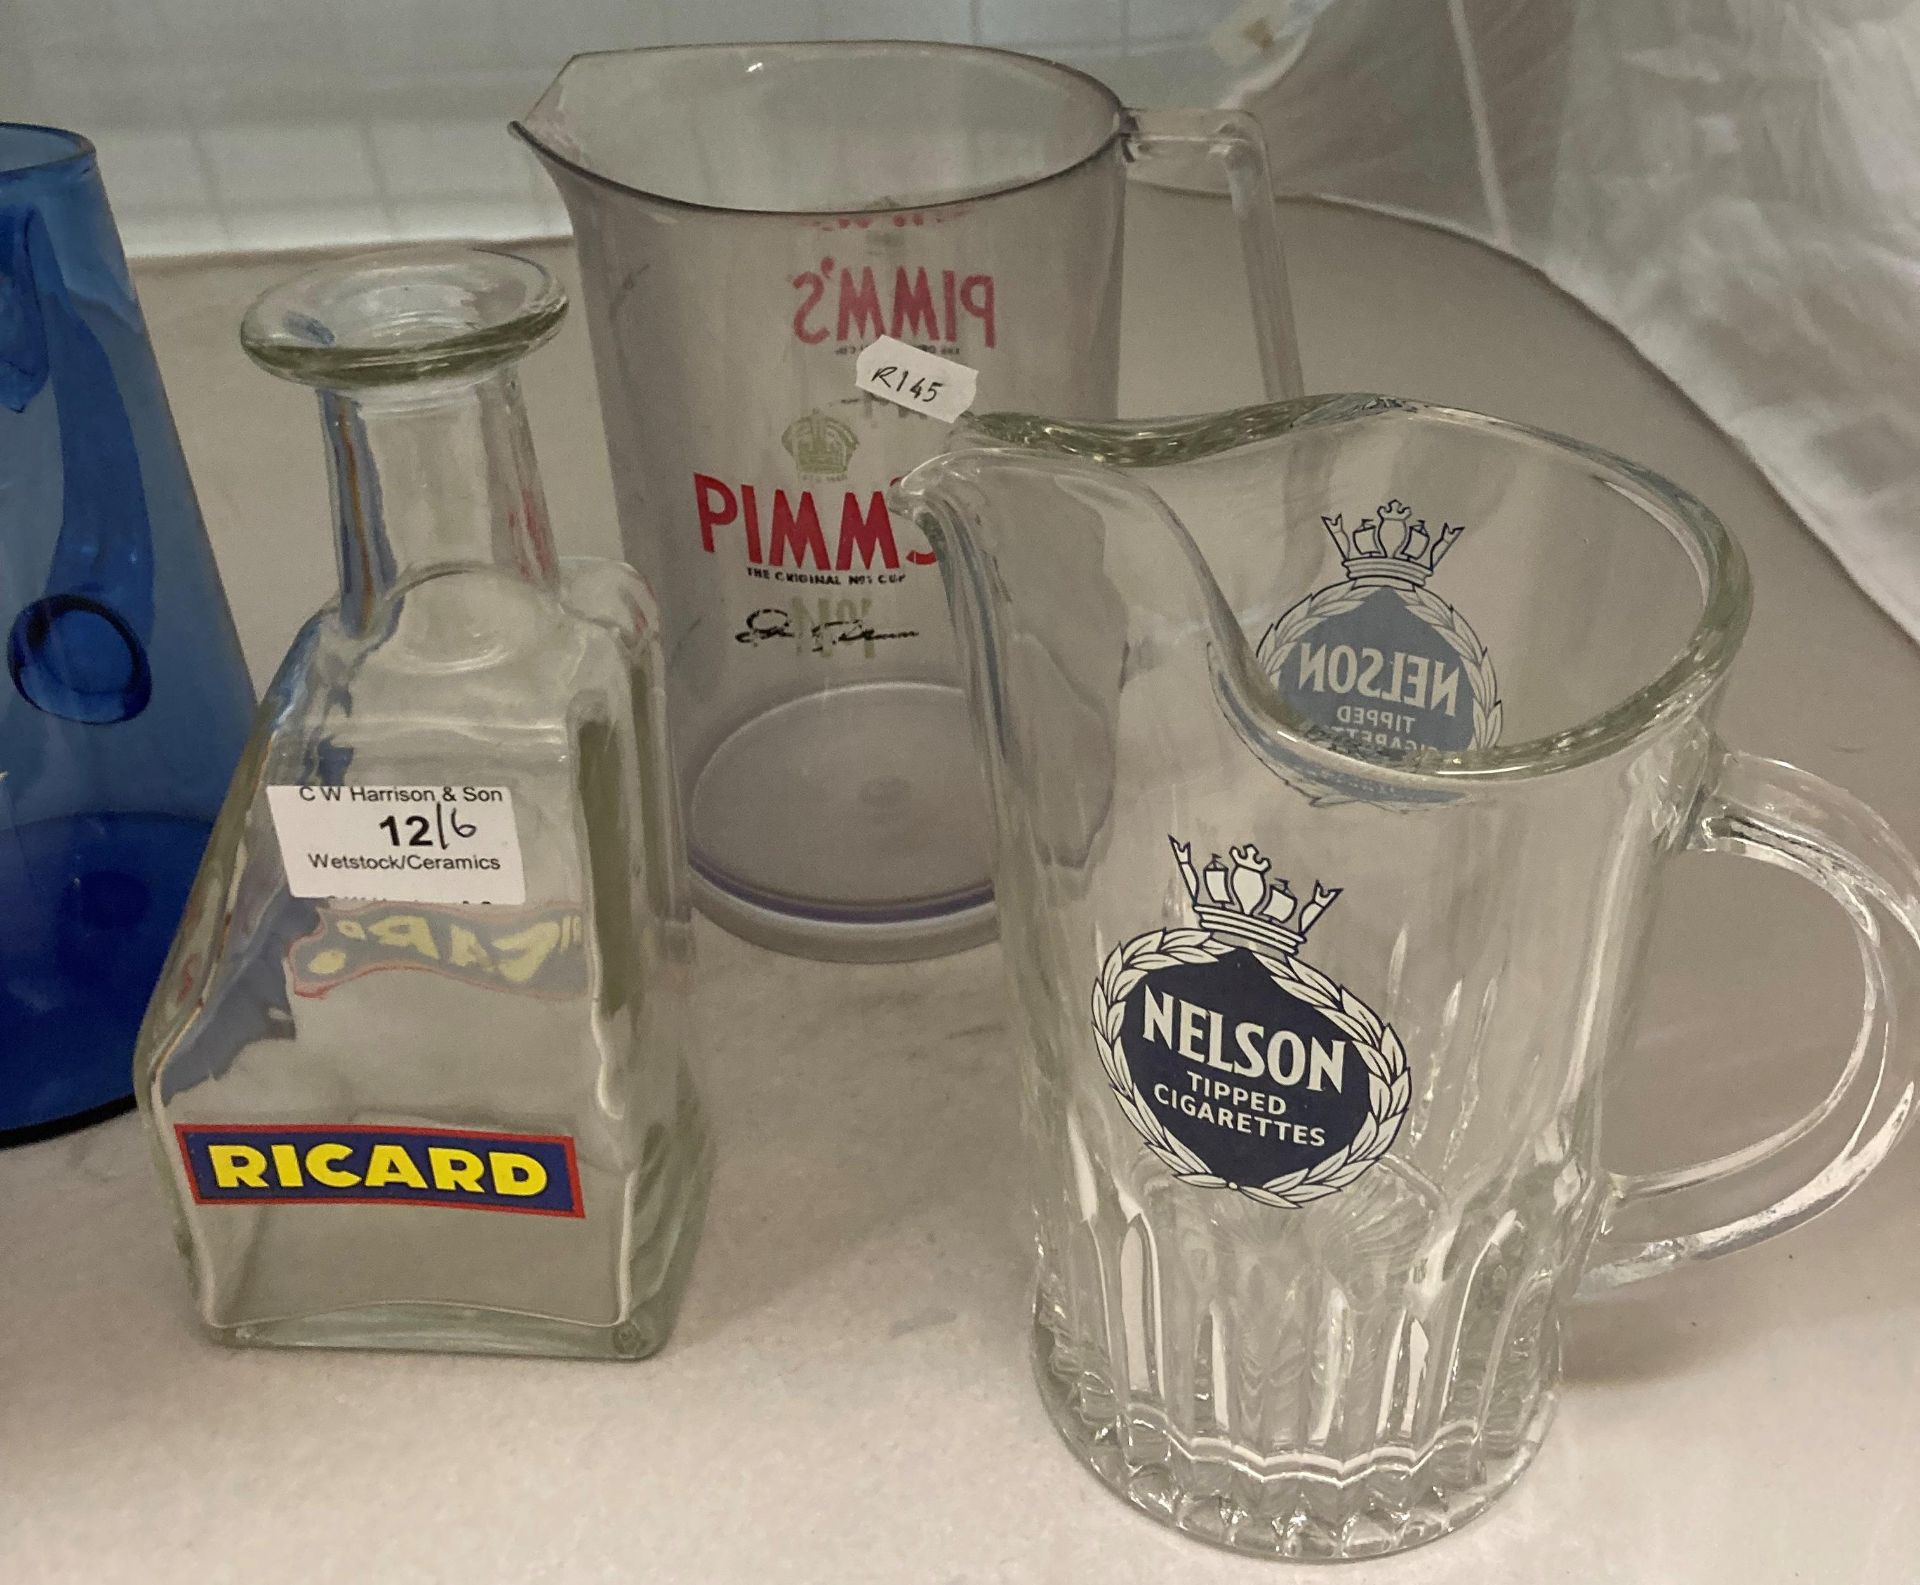 Five glass and one plastic advertising water jugs - Nelson Tipped Cigarettes, Embassy, Player's, - Image 2 of 3